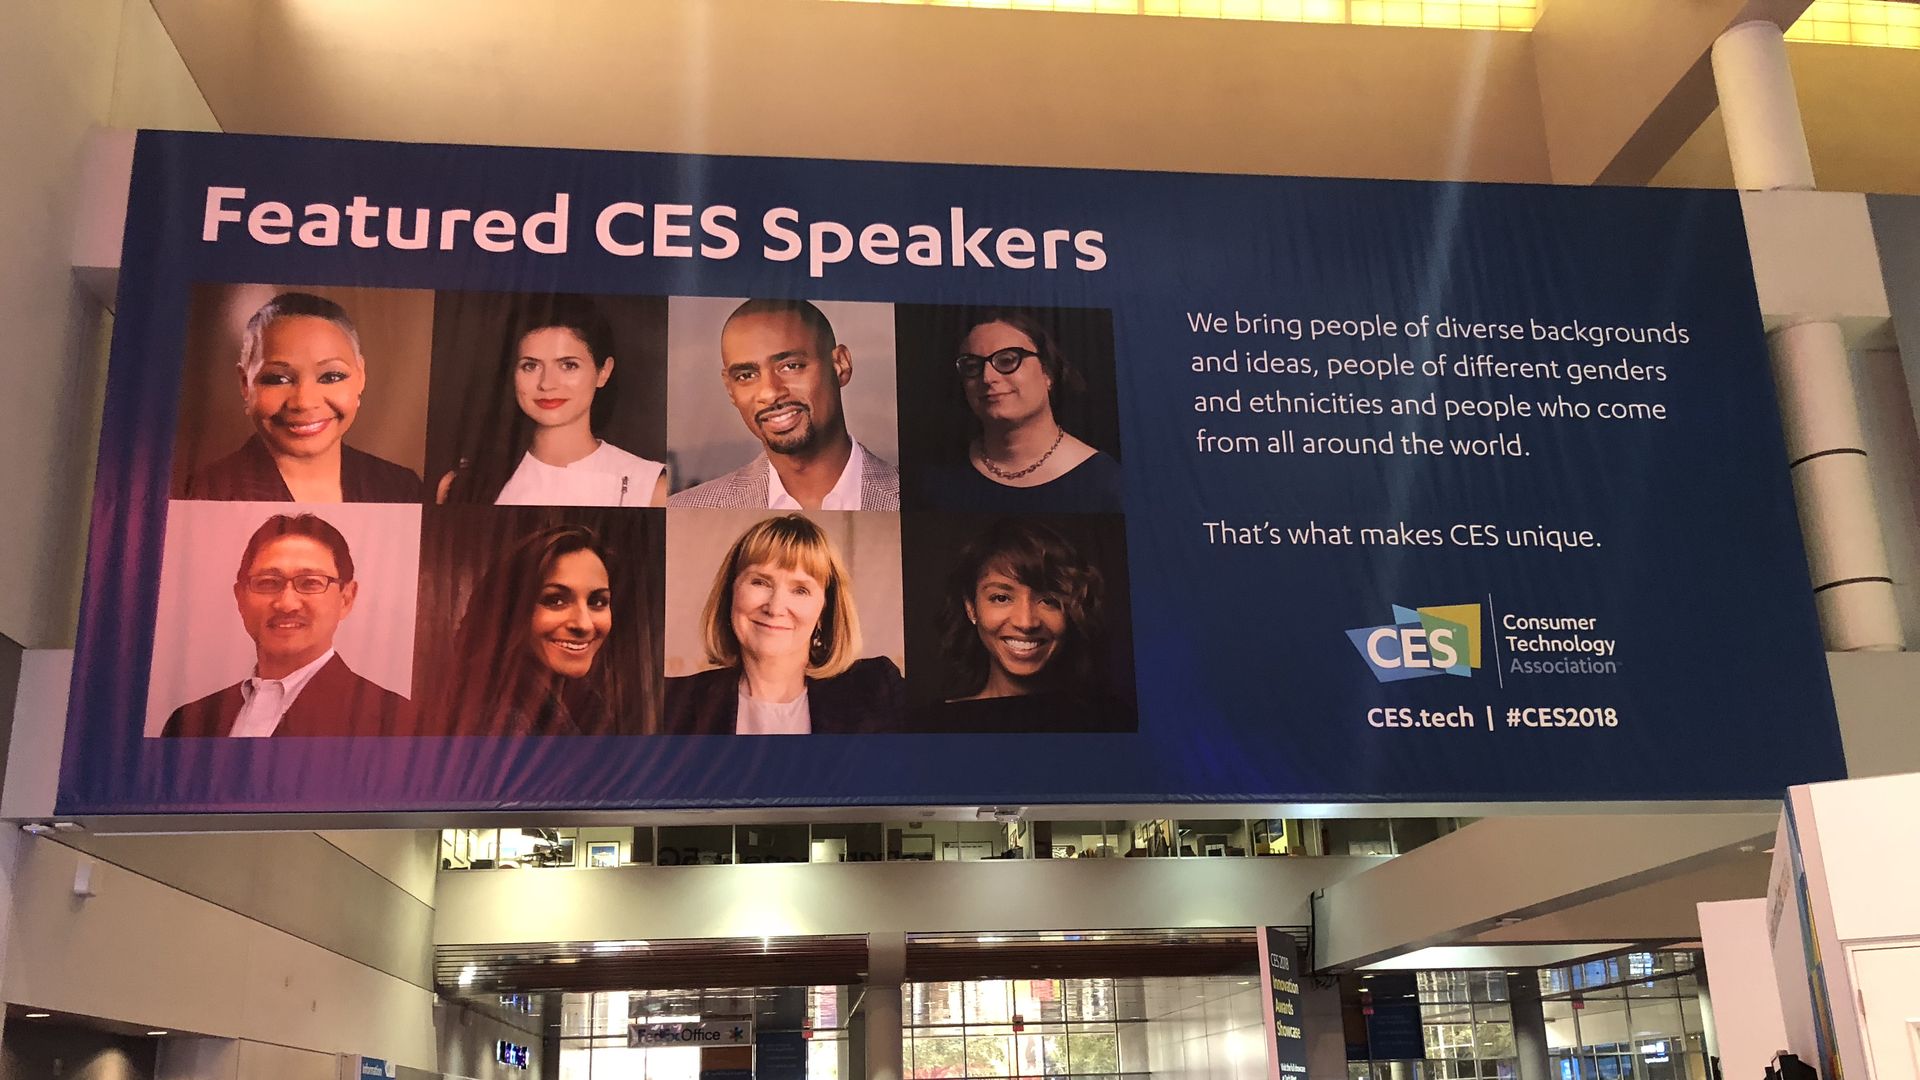 A poster at CES2018 showing some of the folks speaking that aren't white men.